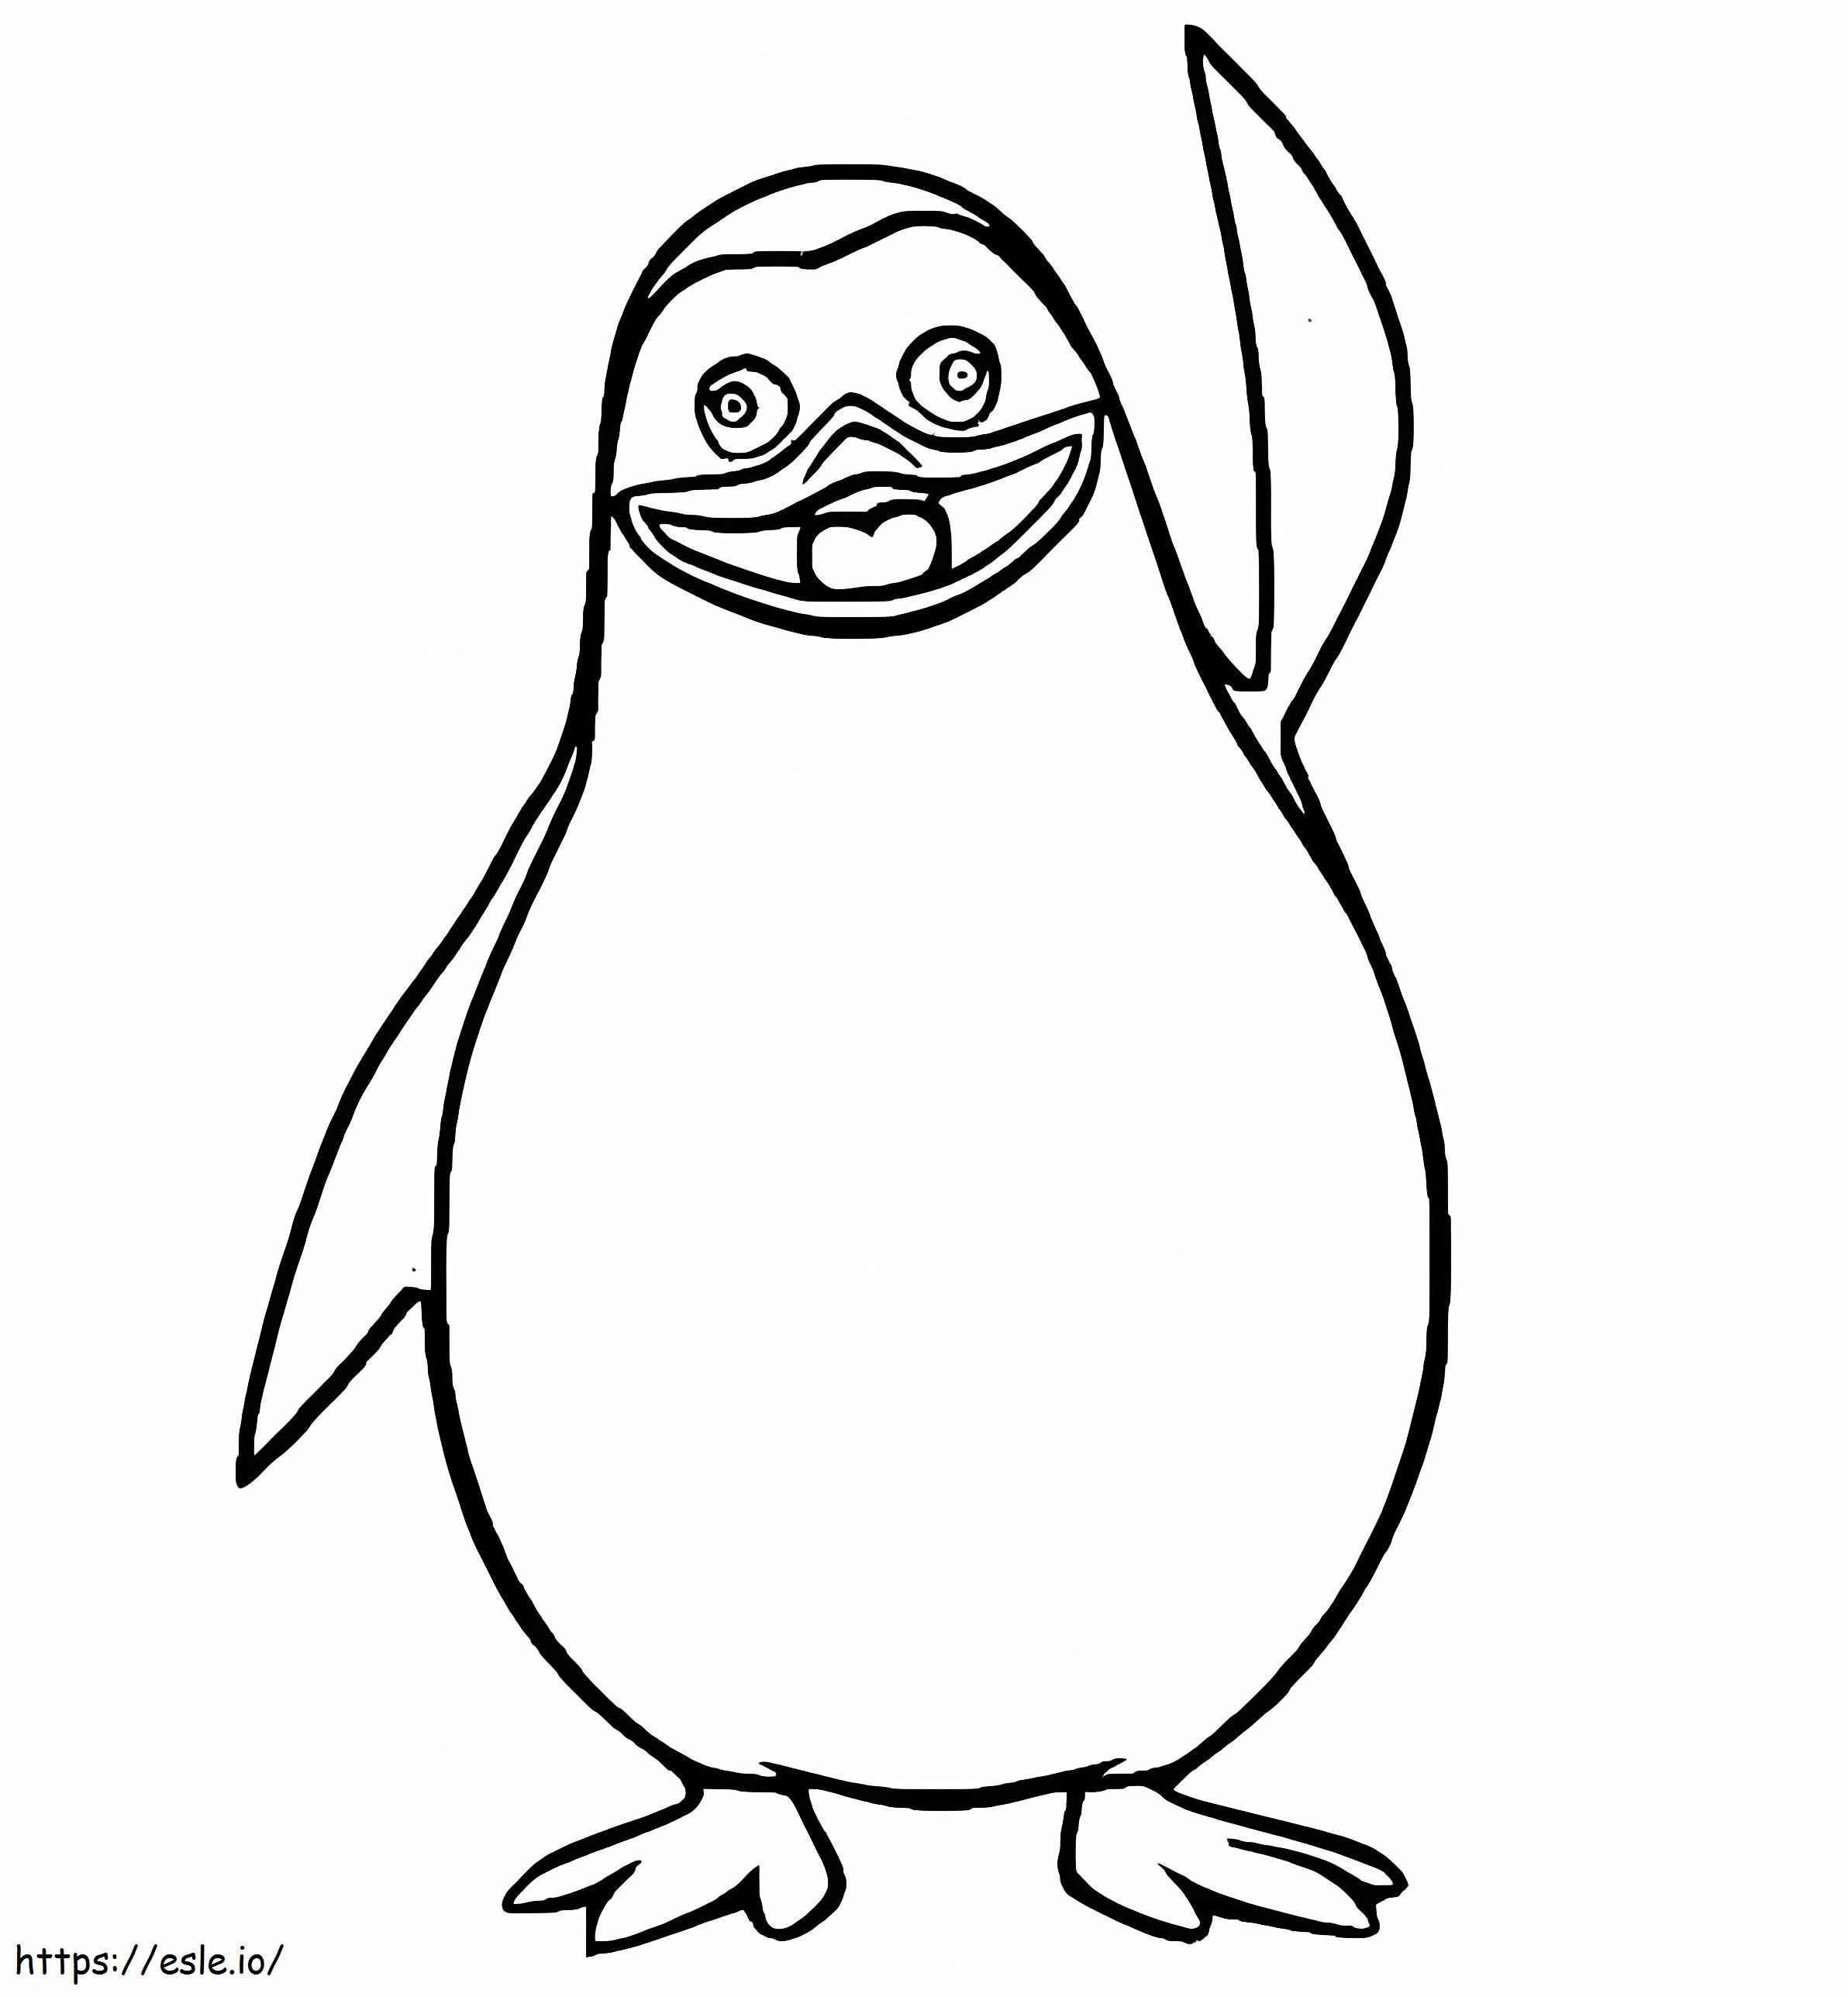 Private From Penguins Of Madagascar coloring page